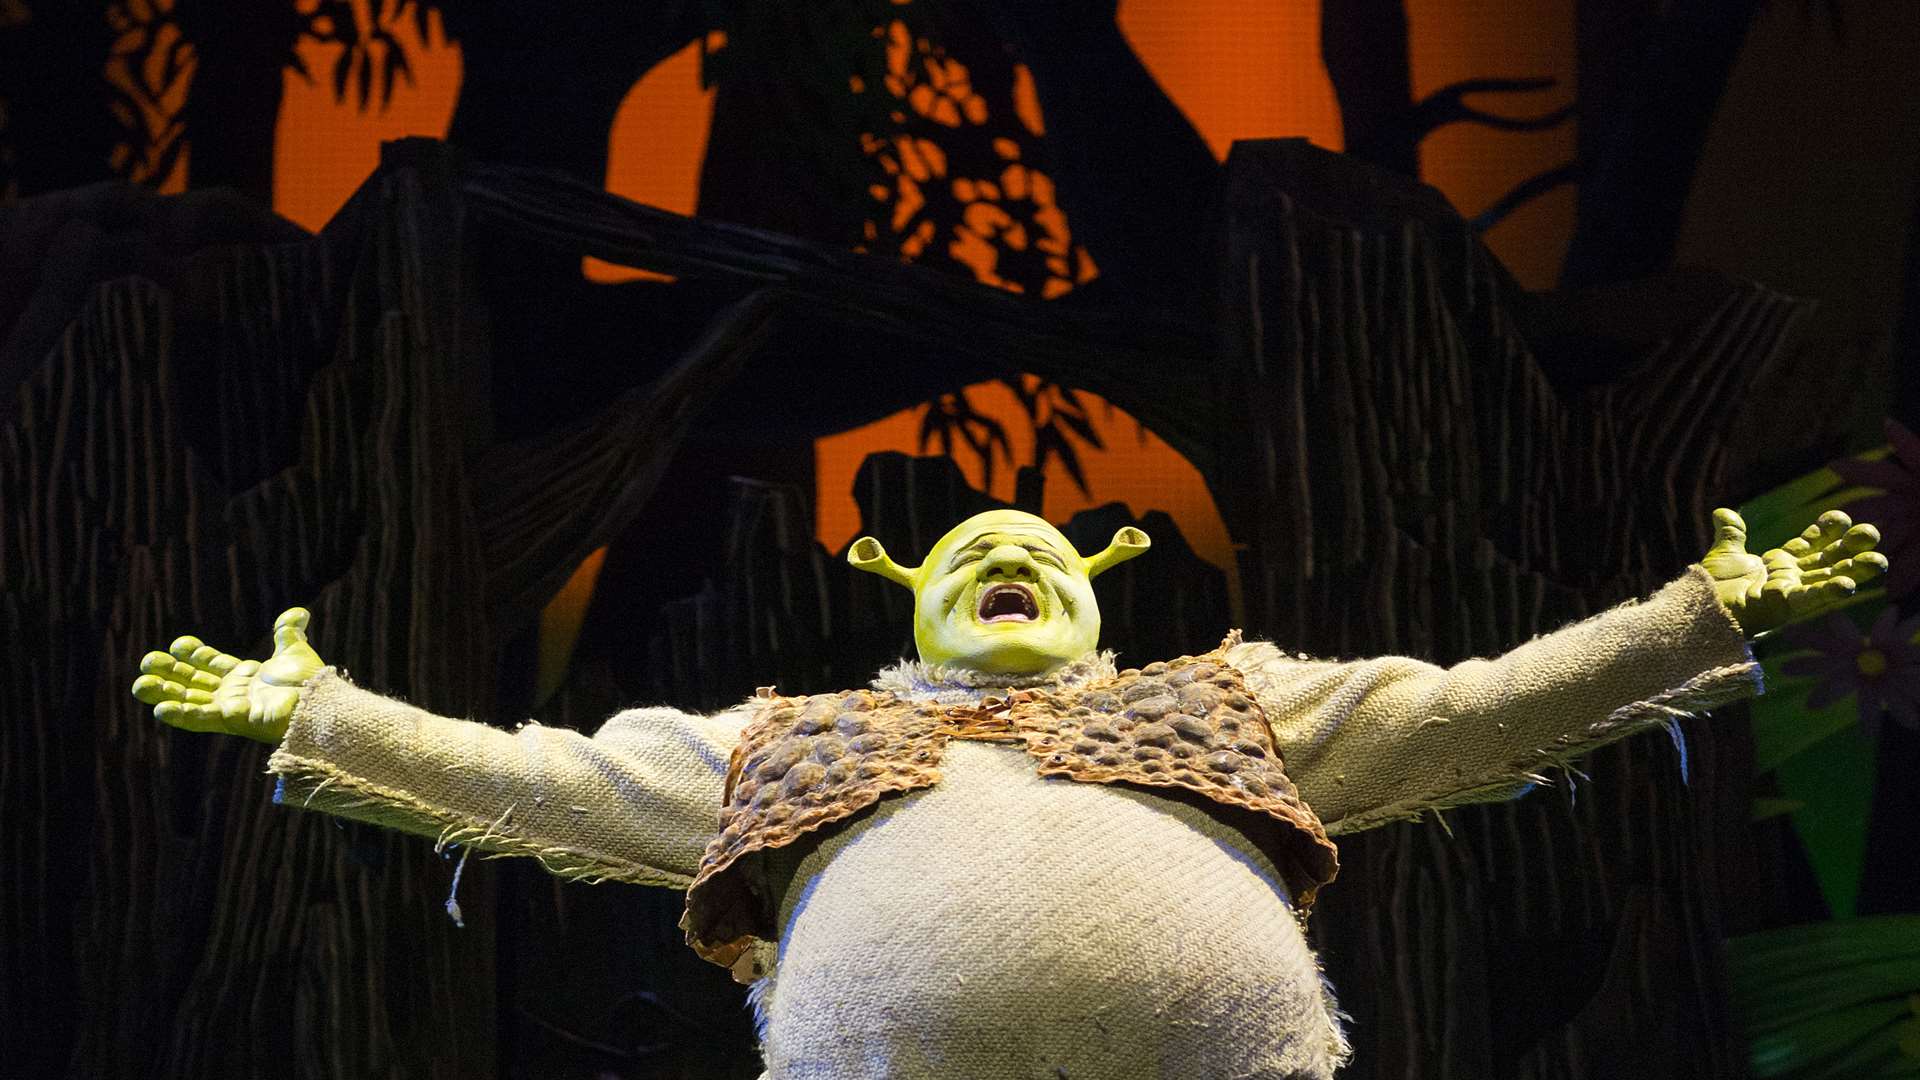 Shrek the Musical is touring - in 2018